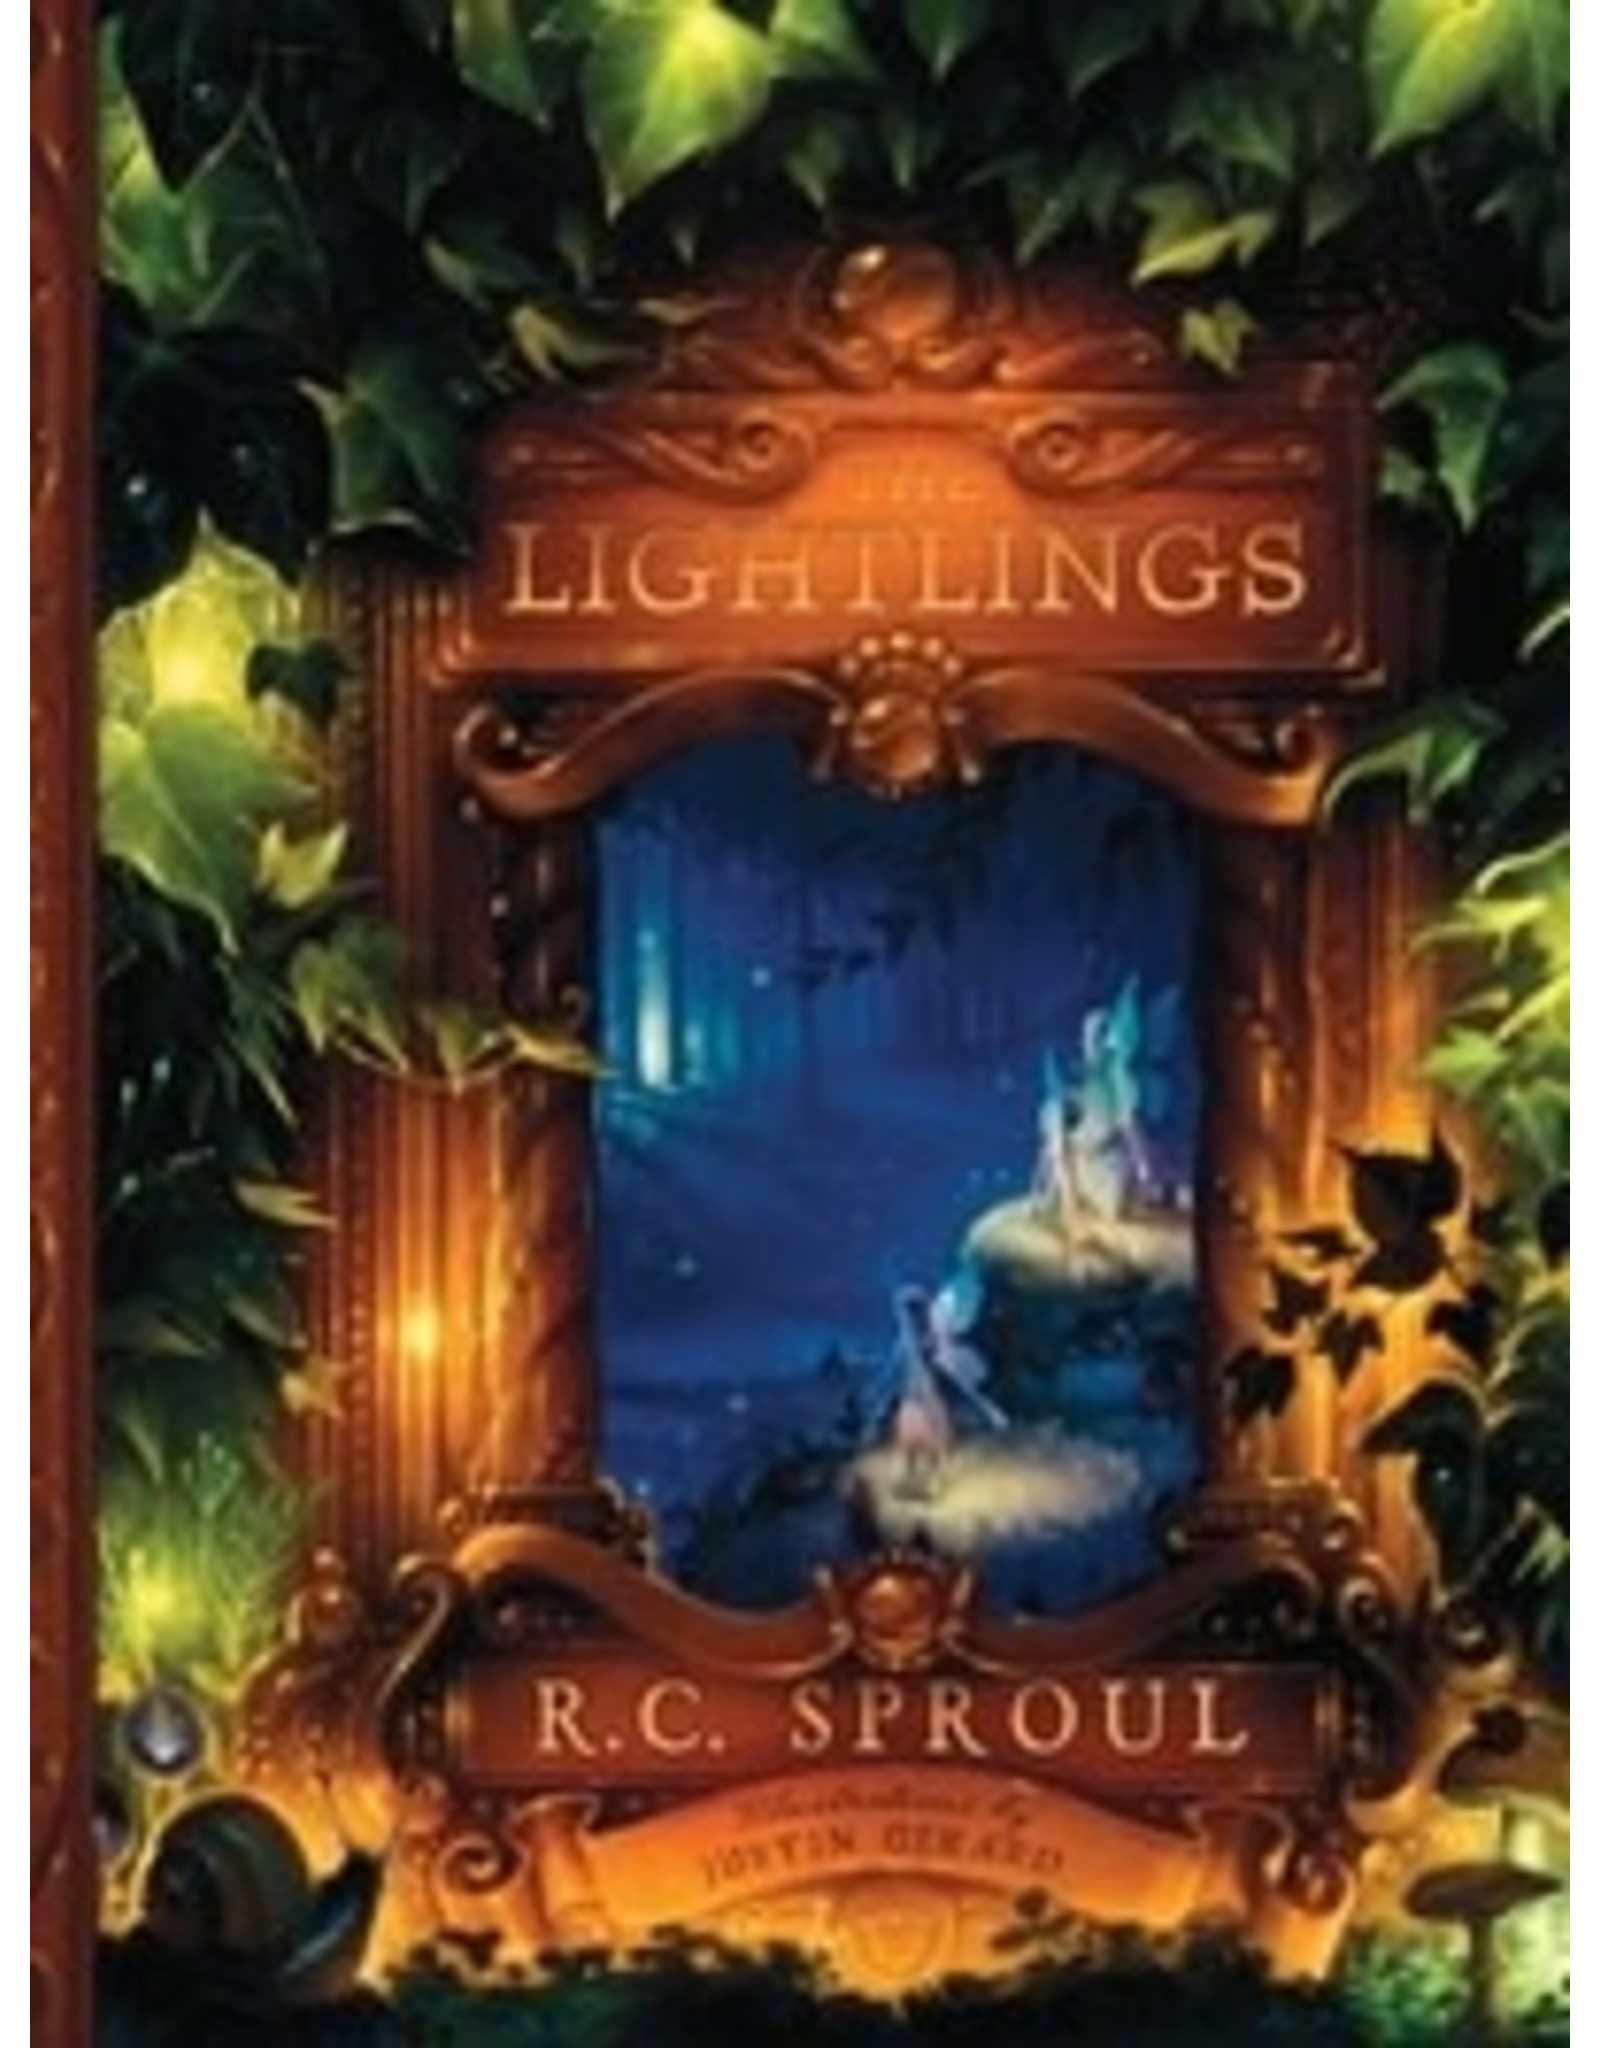 R C Sproul The Lightlings